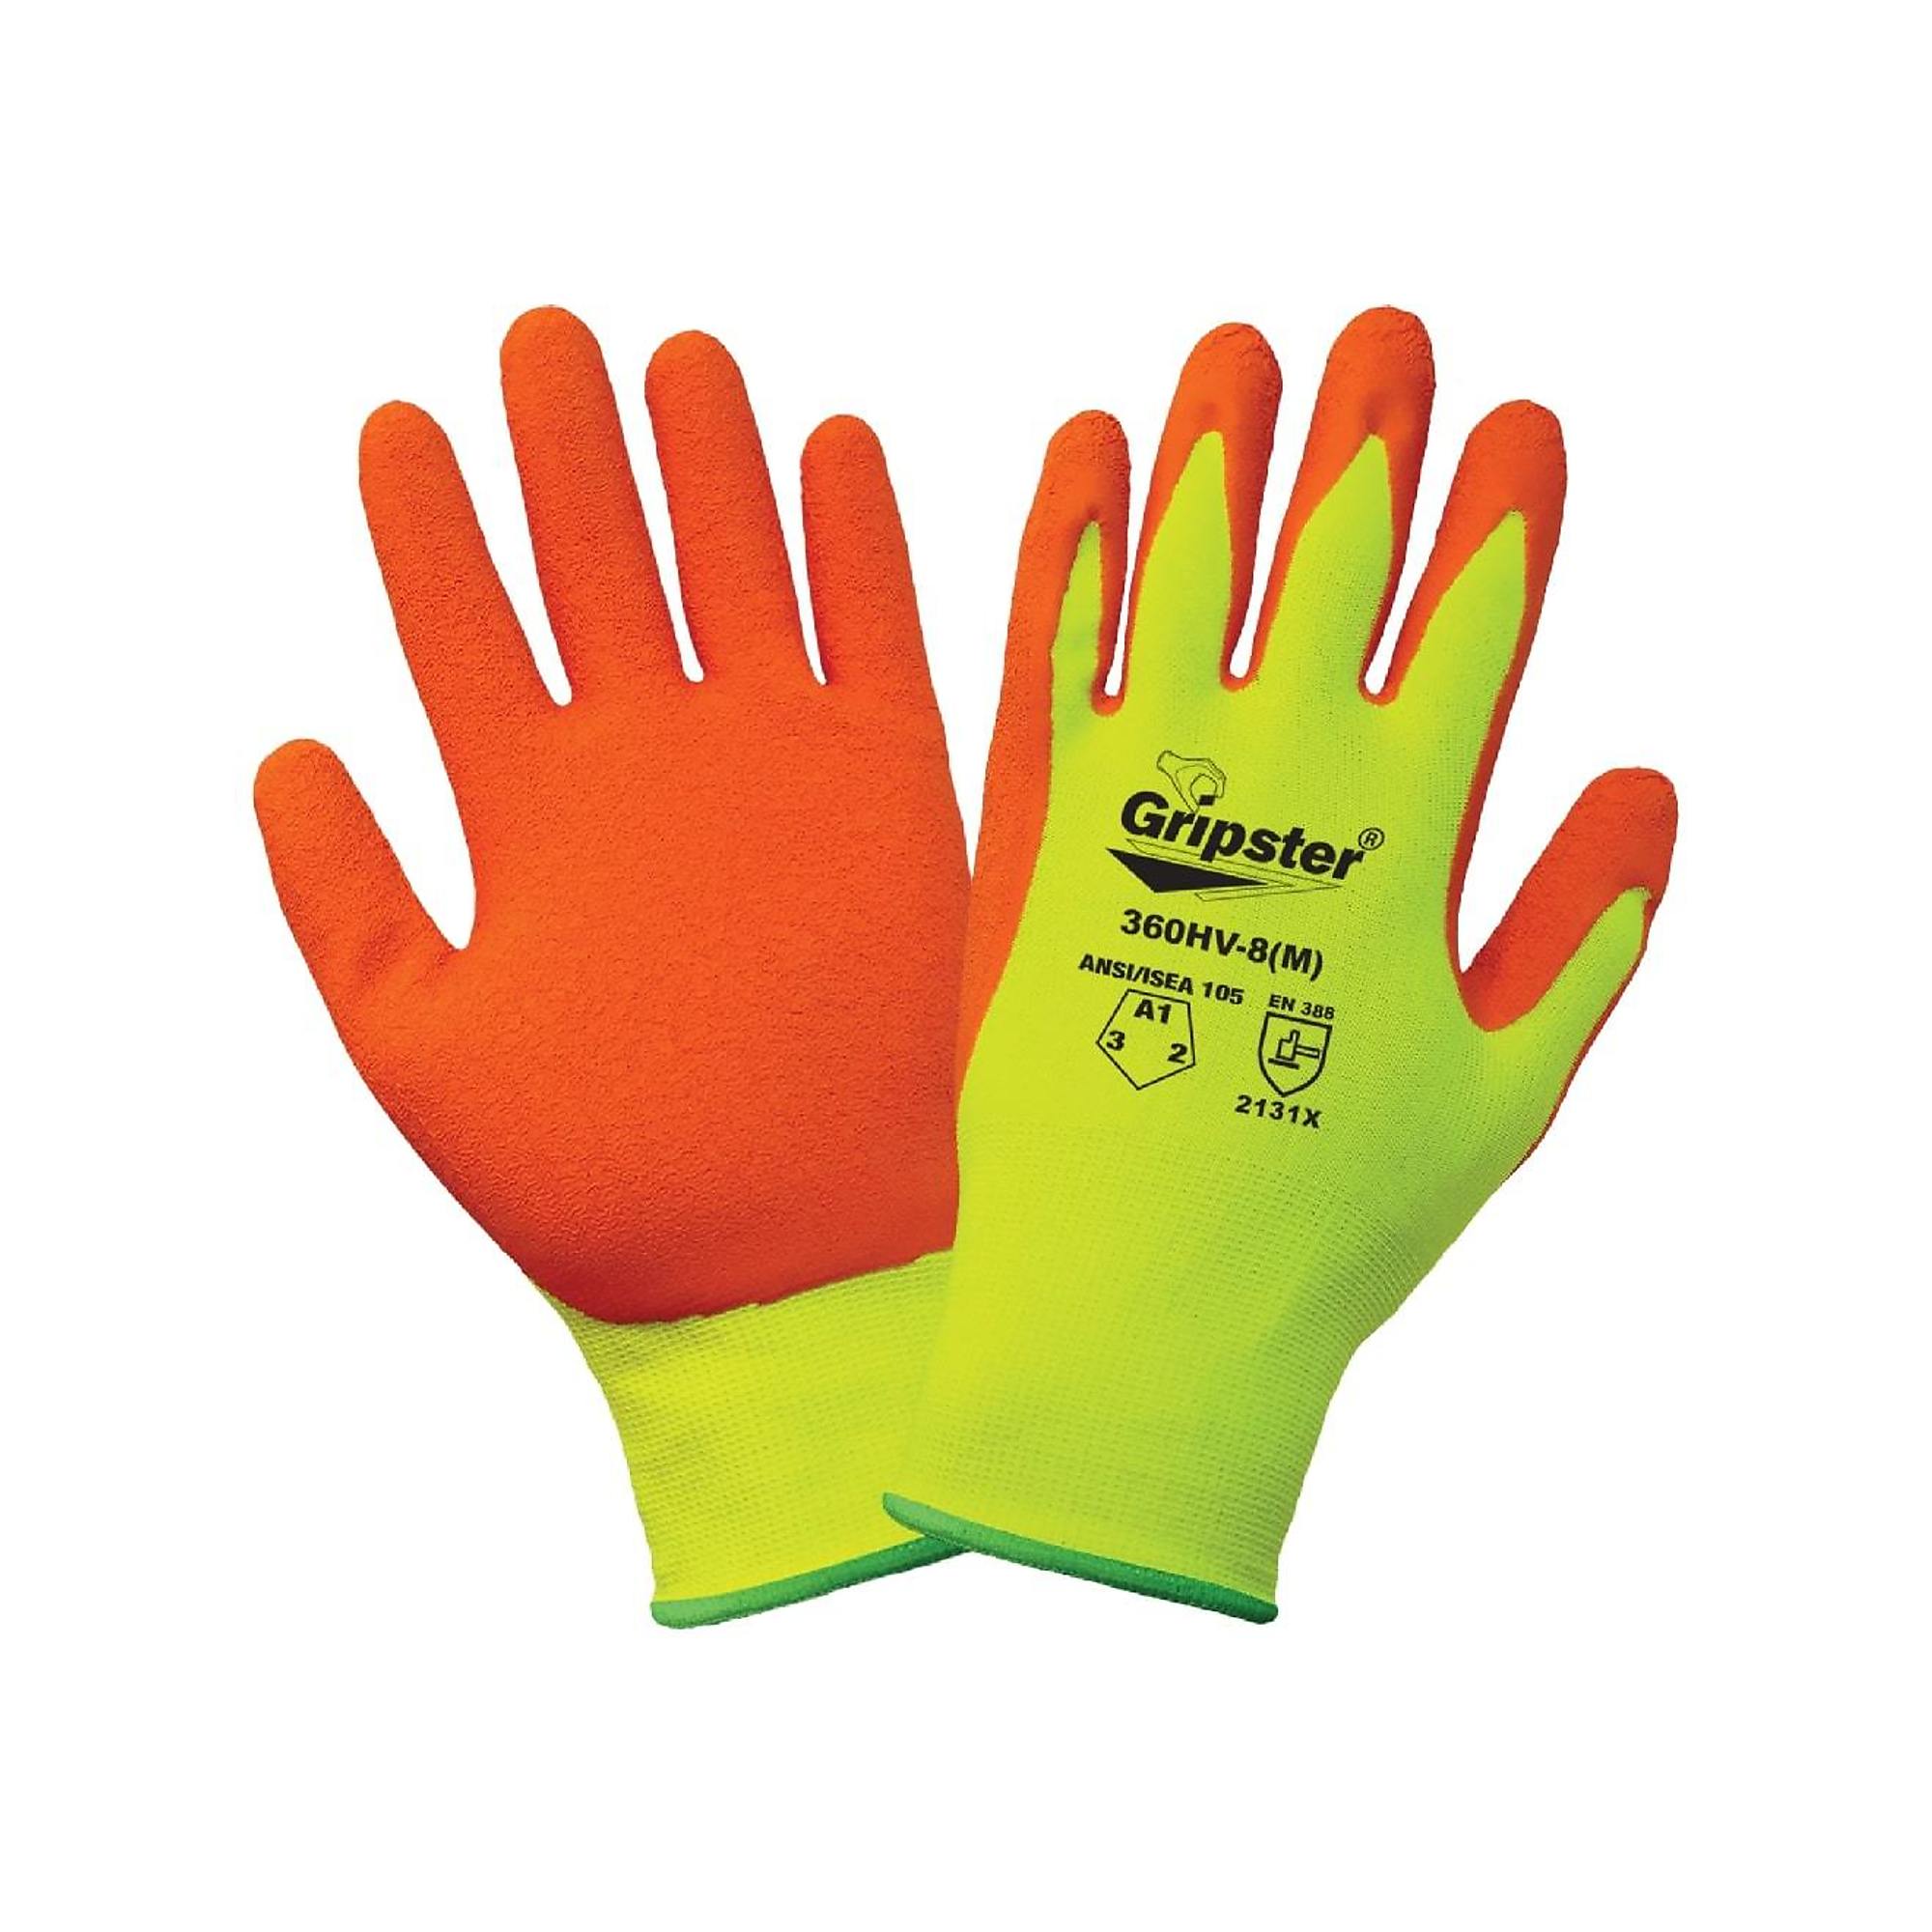 Global Glove Gripster , HV Yel, Org Rubber Palm, Cut Resistant A1 Gloves - 12 Pairs, Size L, Color High Visibility Yellow/Orange, Included (qty.) 12